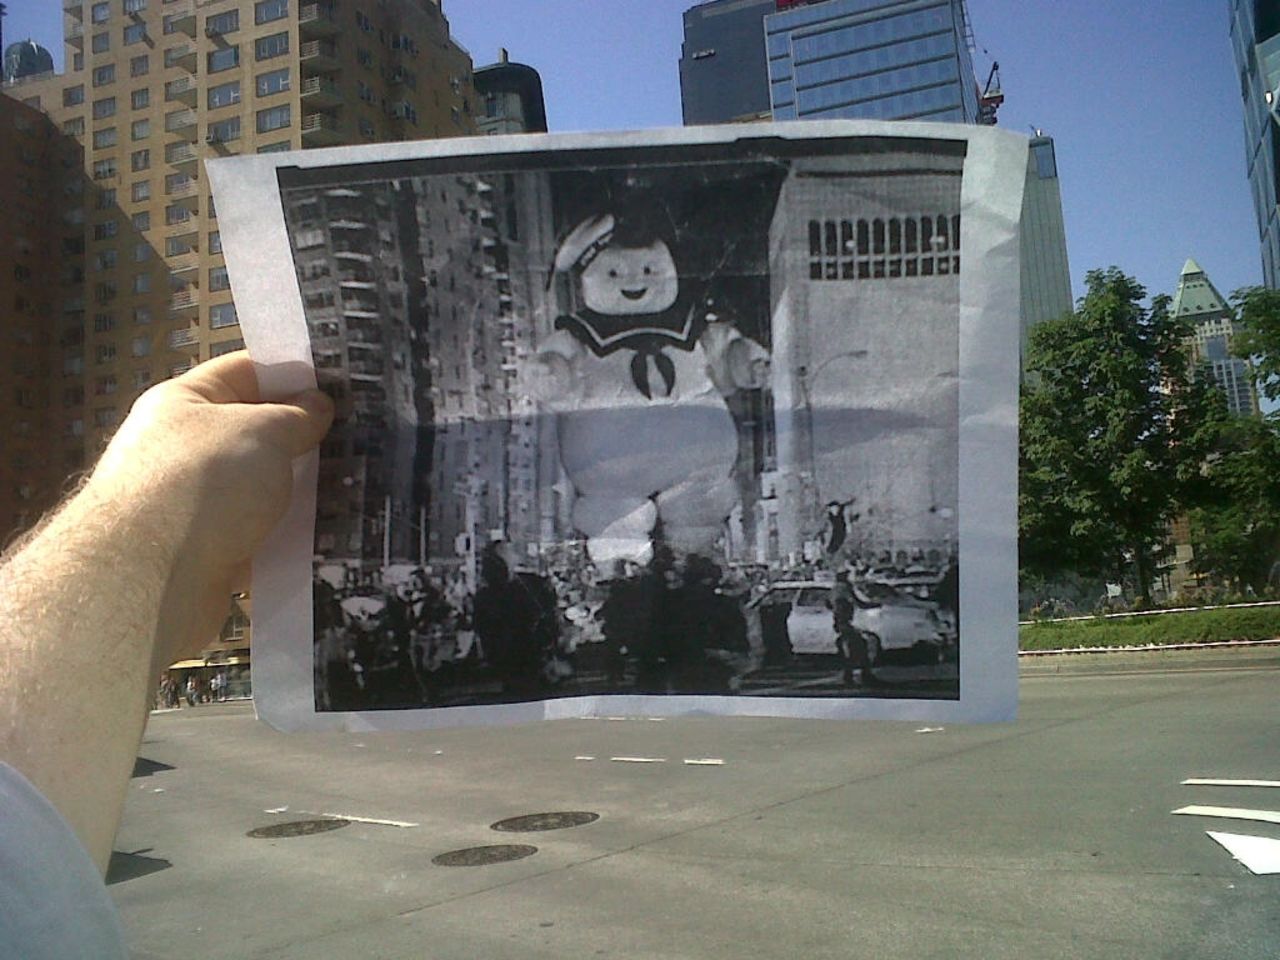 This summer, CNN writer Christopher Moloney (of "Erin Burnett OutFront")  noticed that he had the same commute to work as the Stay Puft Marshmallow Man. Inspired, he printed off a black and white screen grab of the scene from "Ghostbusters" and snapped a photo.  He posted it online, his friends and family loved it, and his blog FILMography was born.